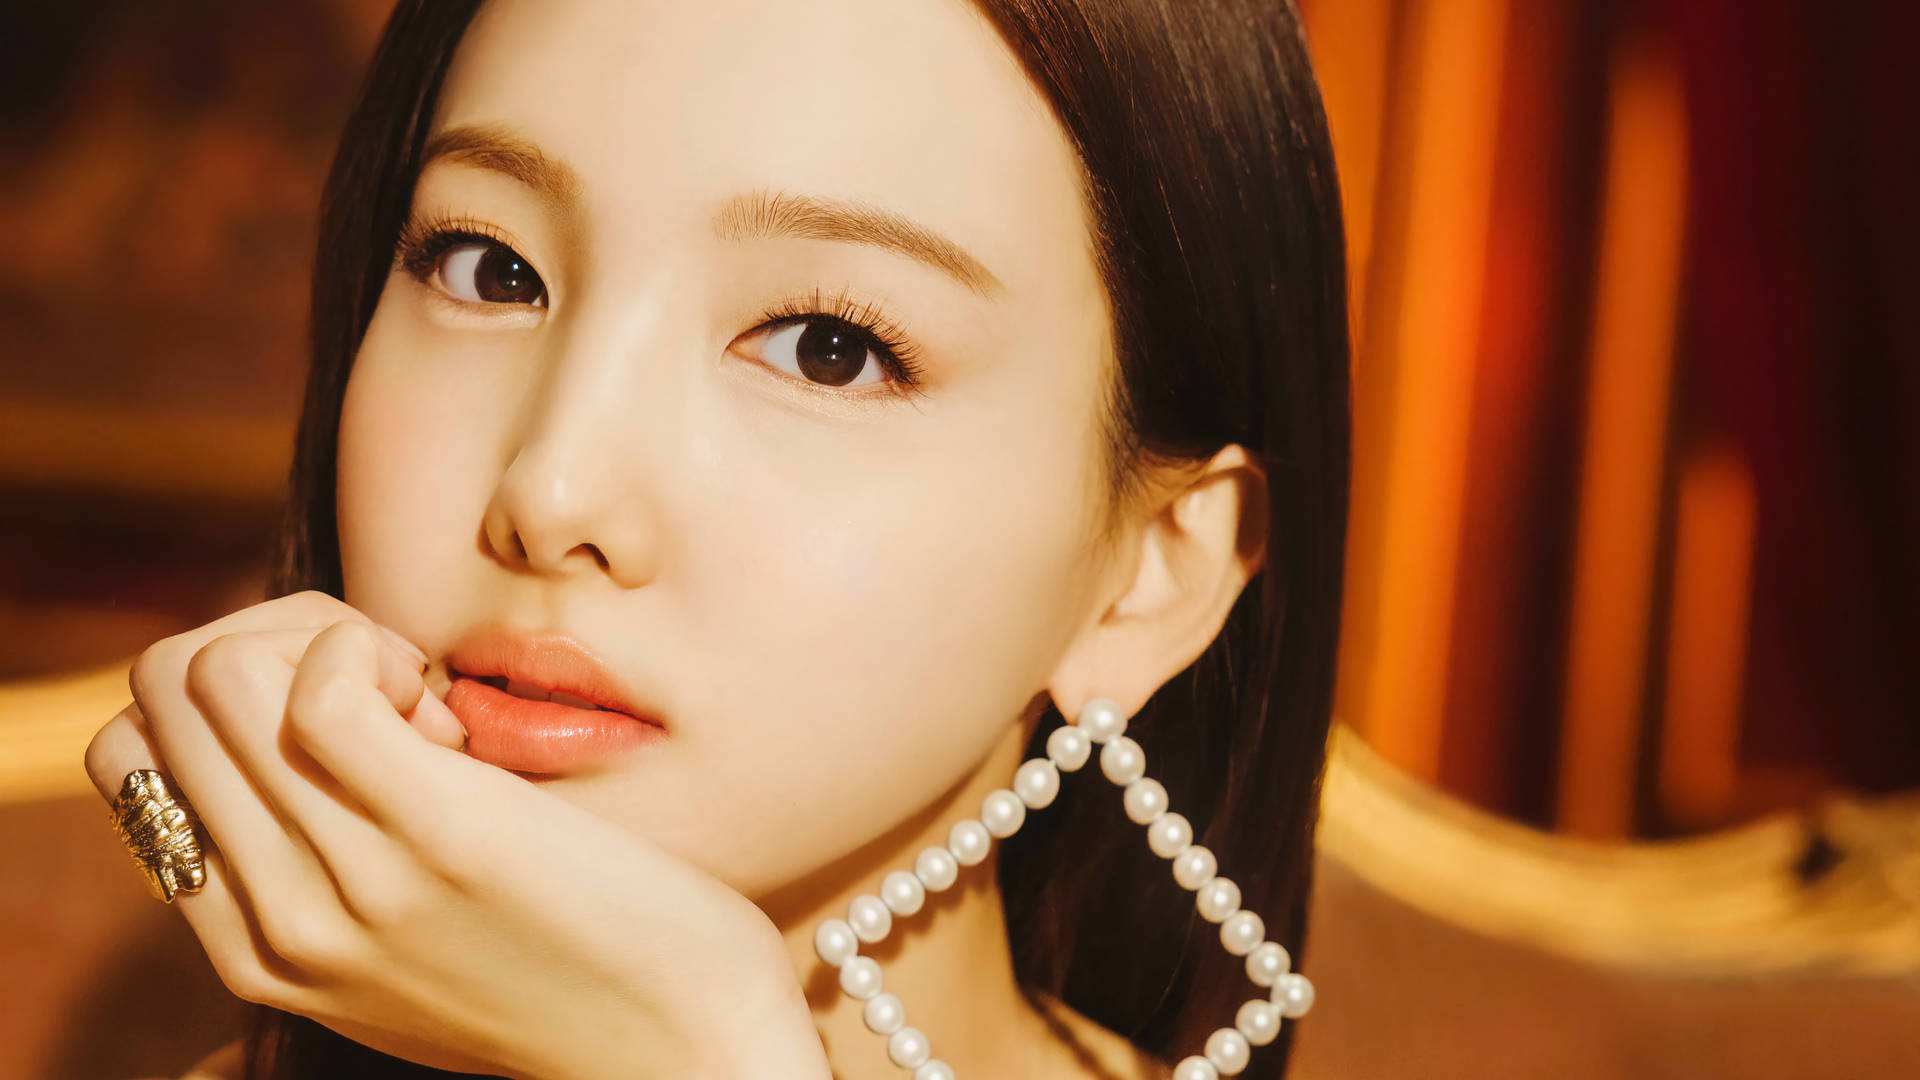 Twice Nayeon With Large Earring Wallpaper